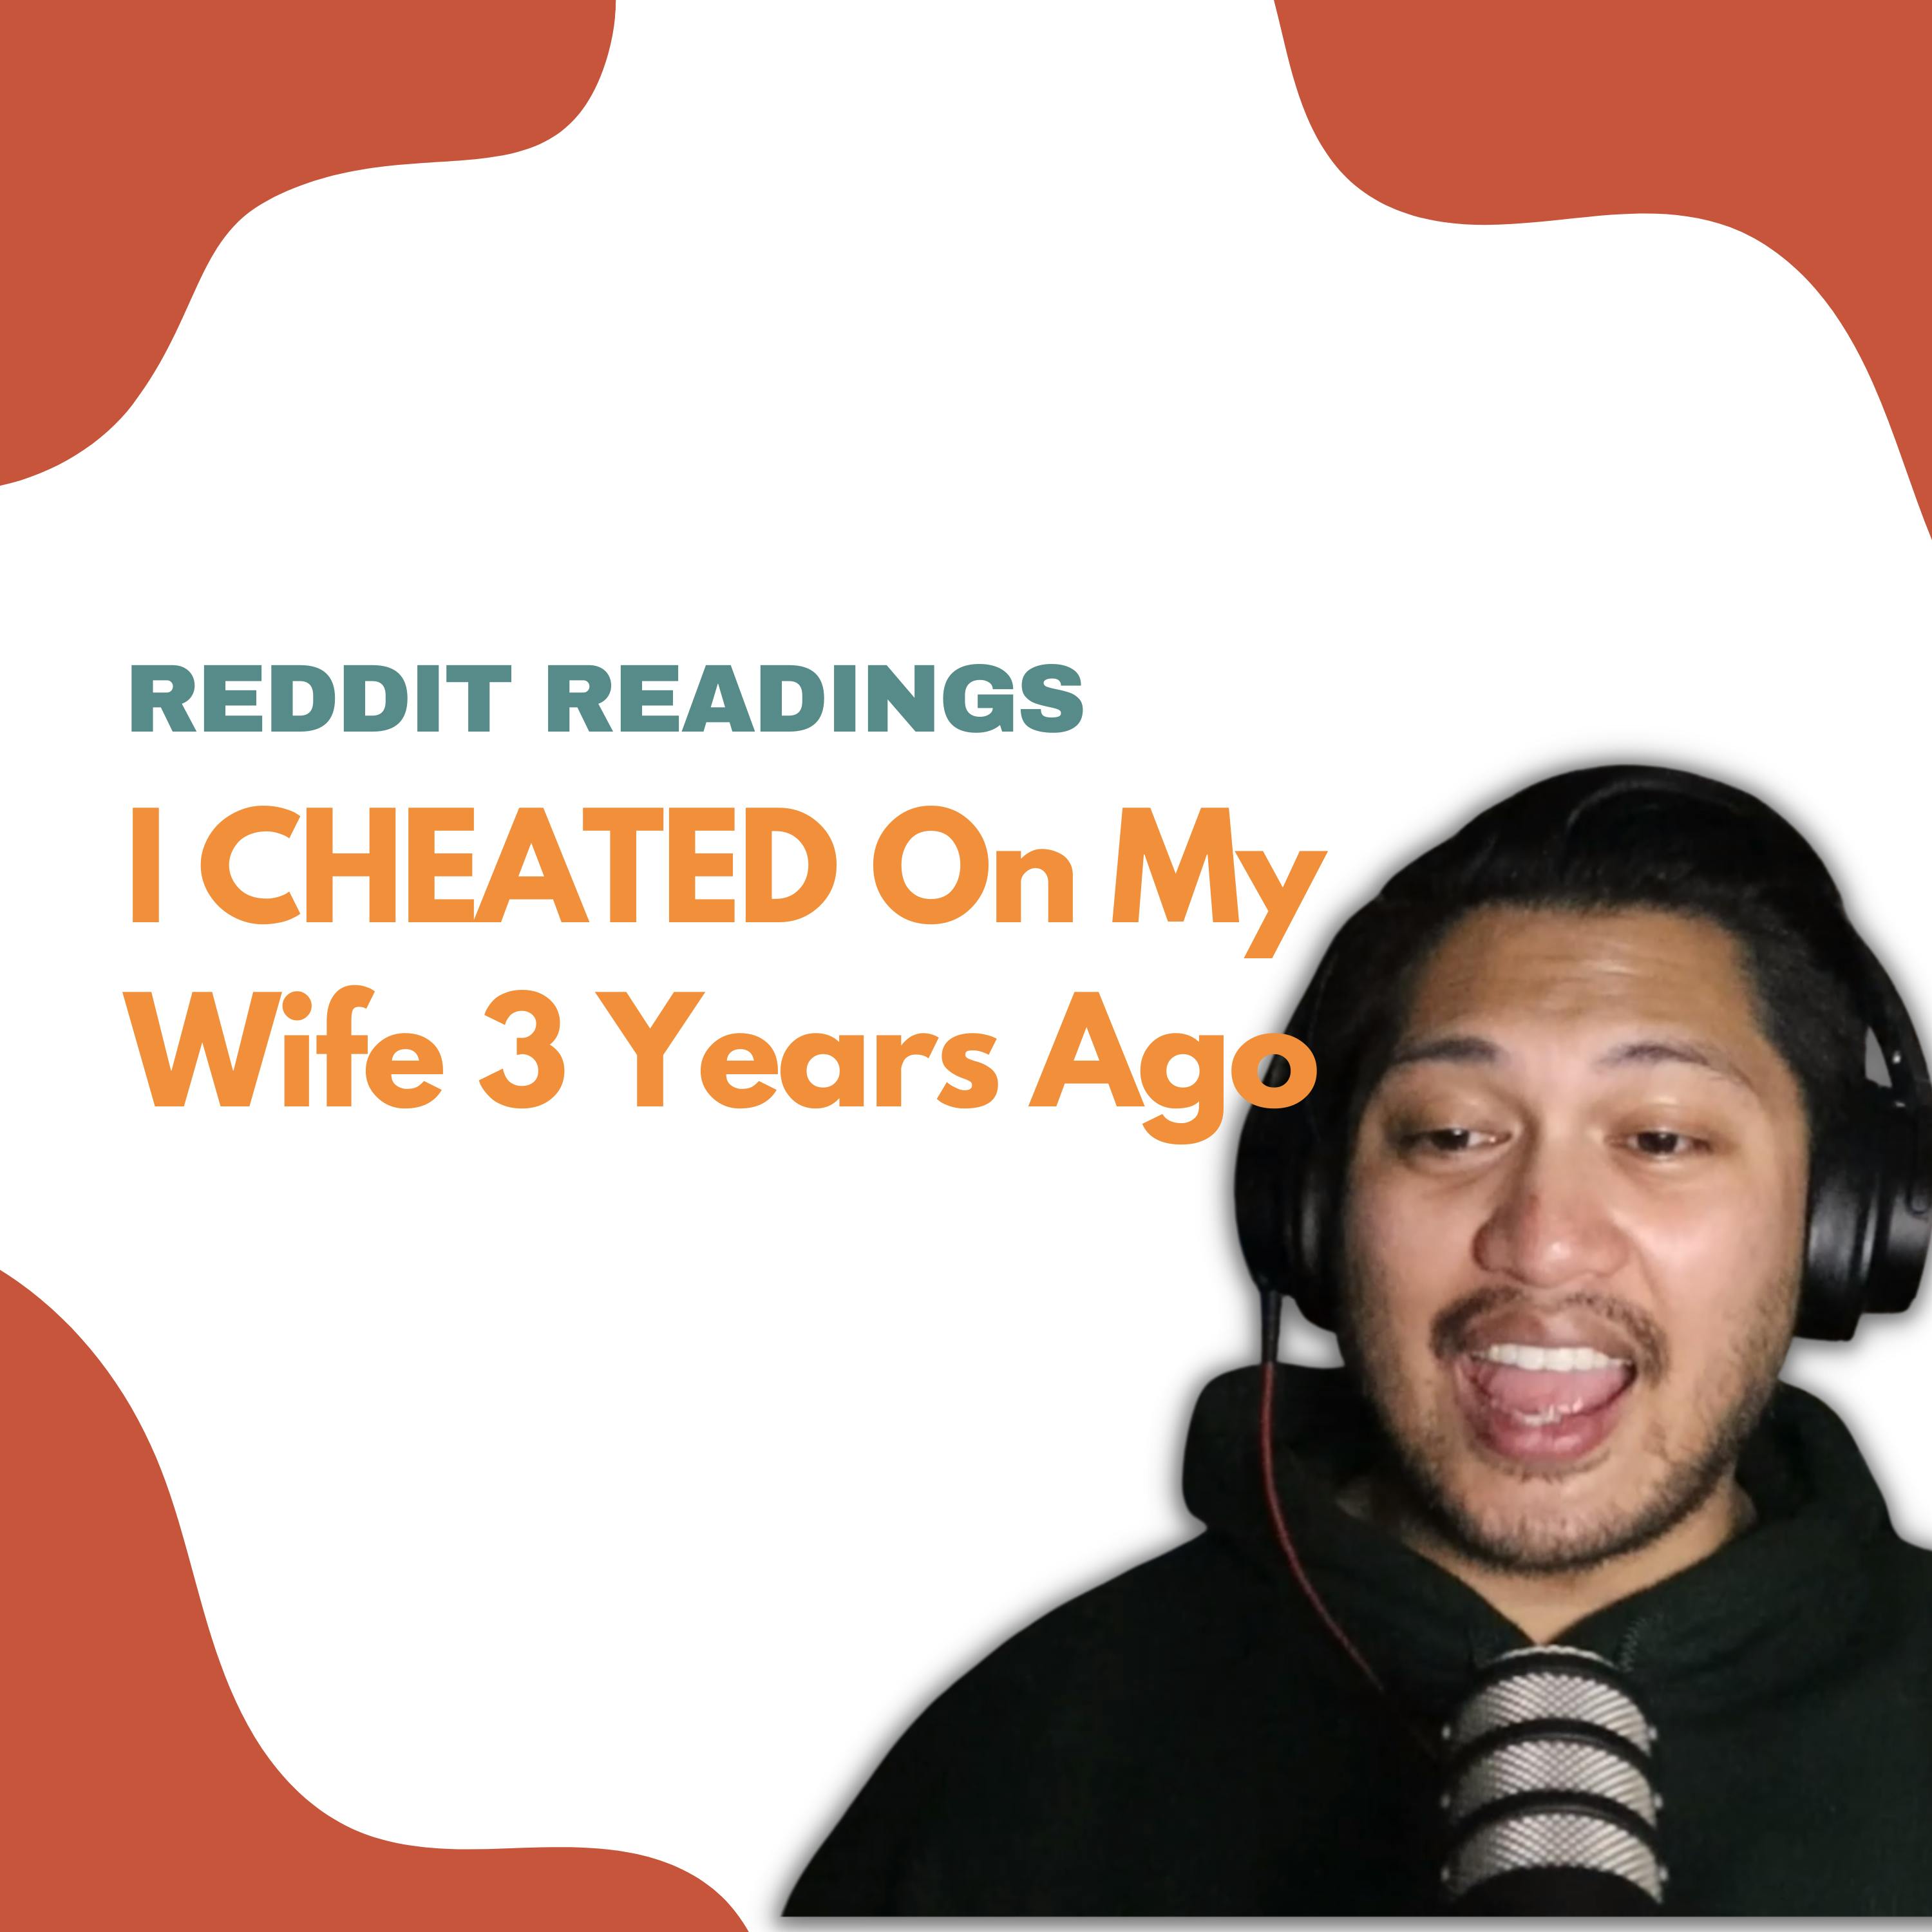 I CHEATED On My Wife 3 Years Ago | Reddit Readings Image